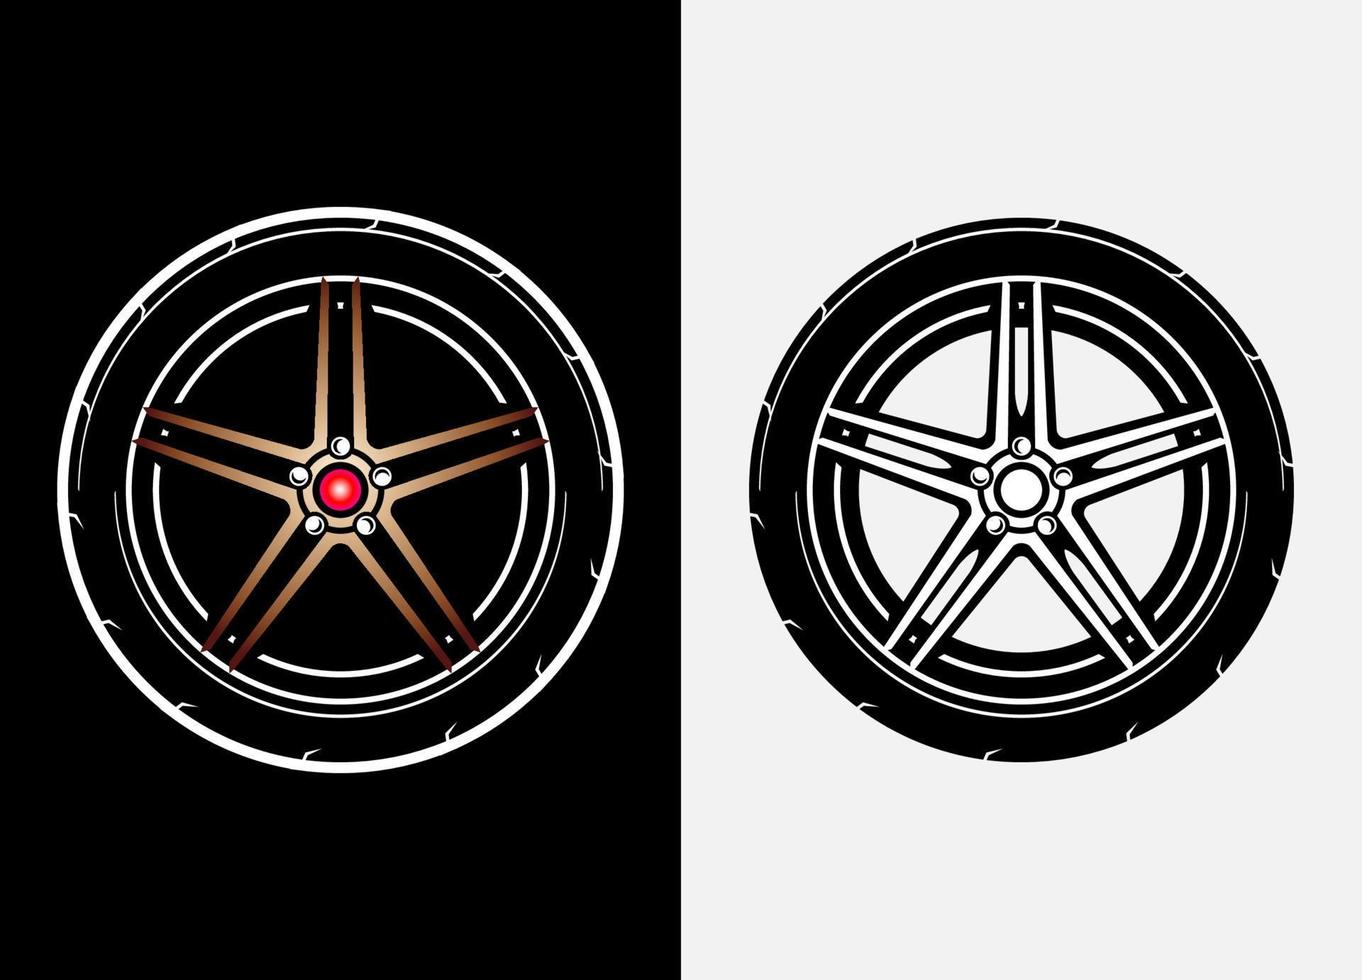 Different color set of car wheels, rubber tyre, car tyre, truck wheel illustration in race style. Racing wheels vector. Black and white isolated background. Eps 10. vector